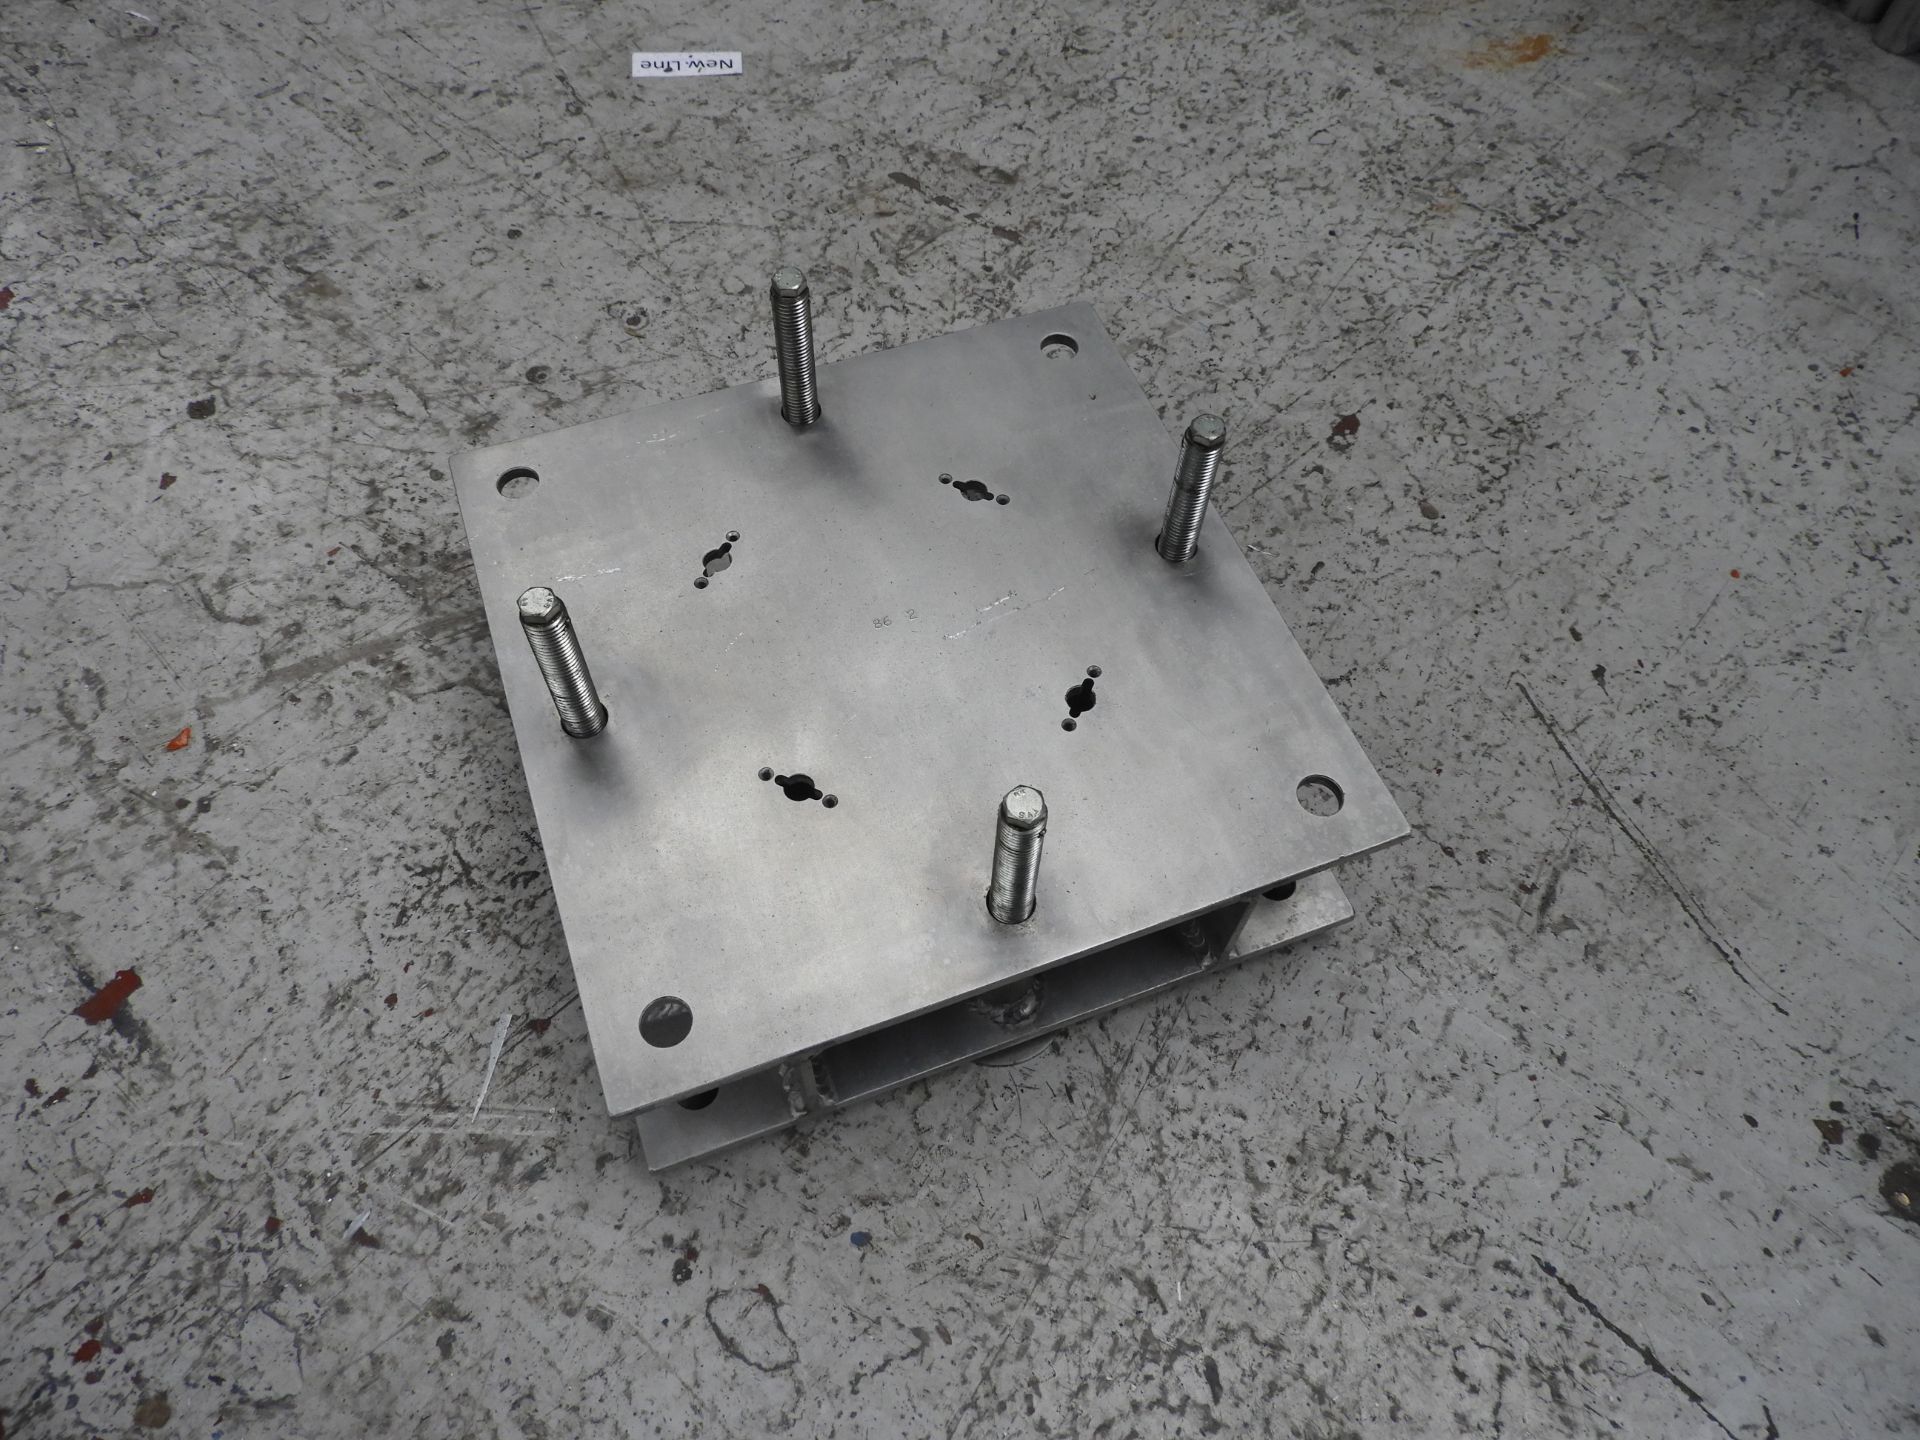 Base plates for 12' uprights with 2 out rigger legs per base plate